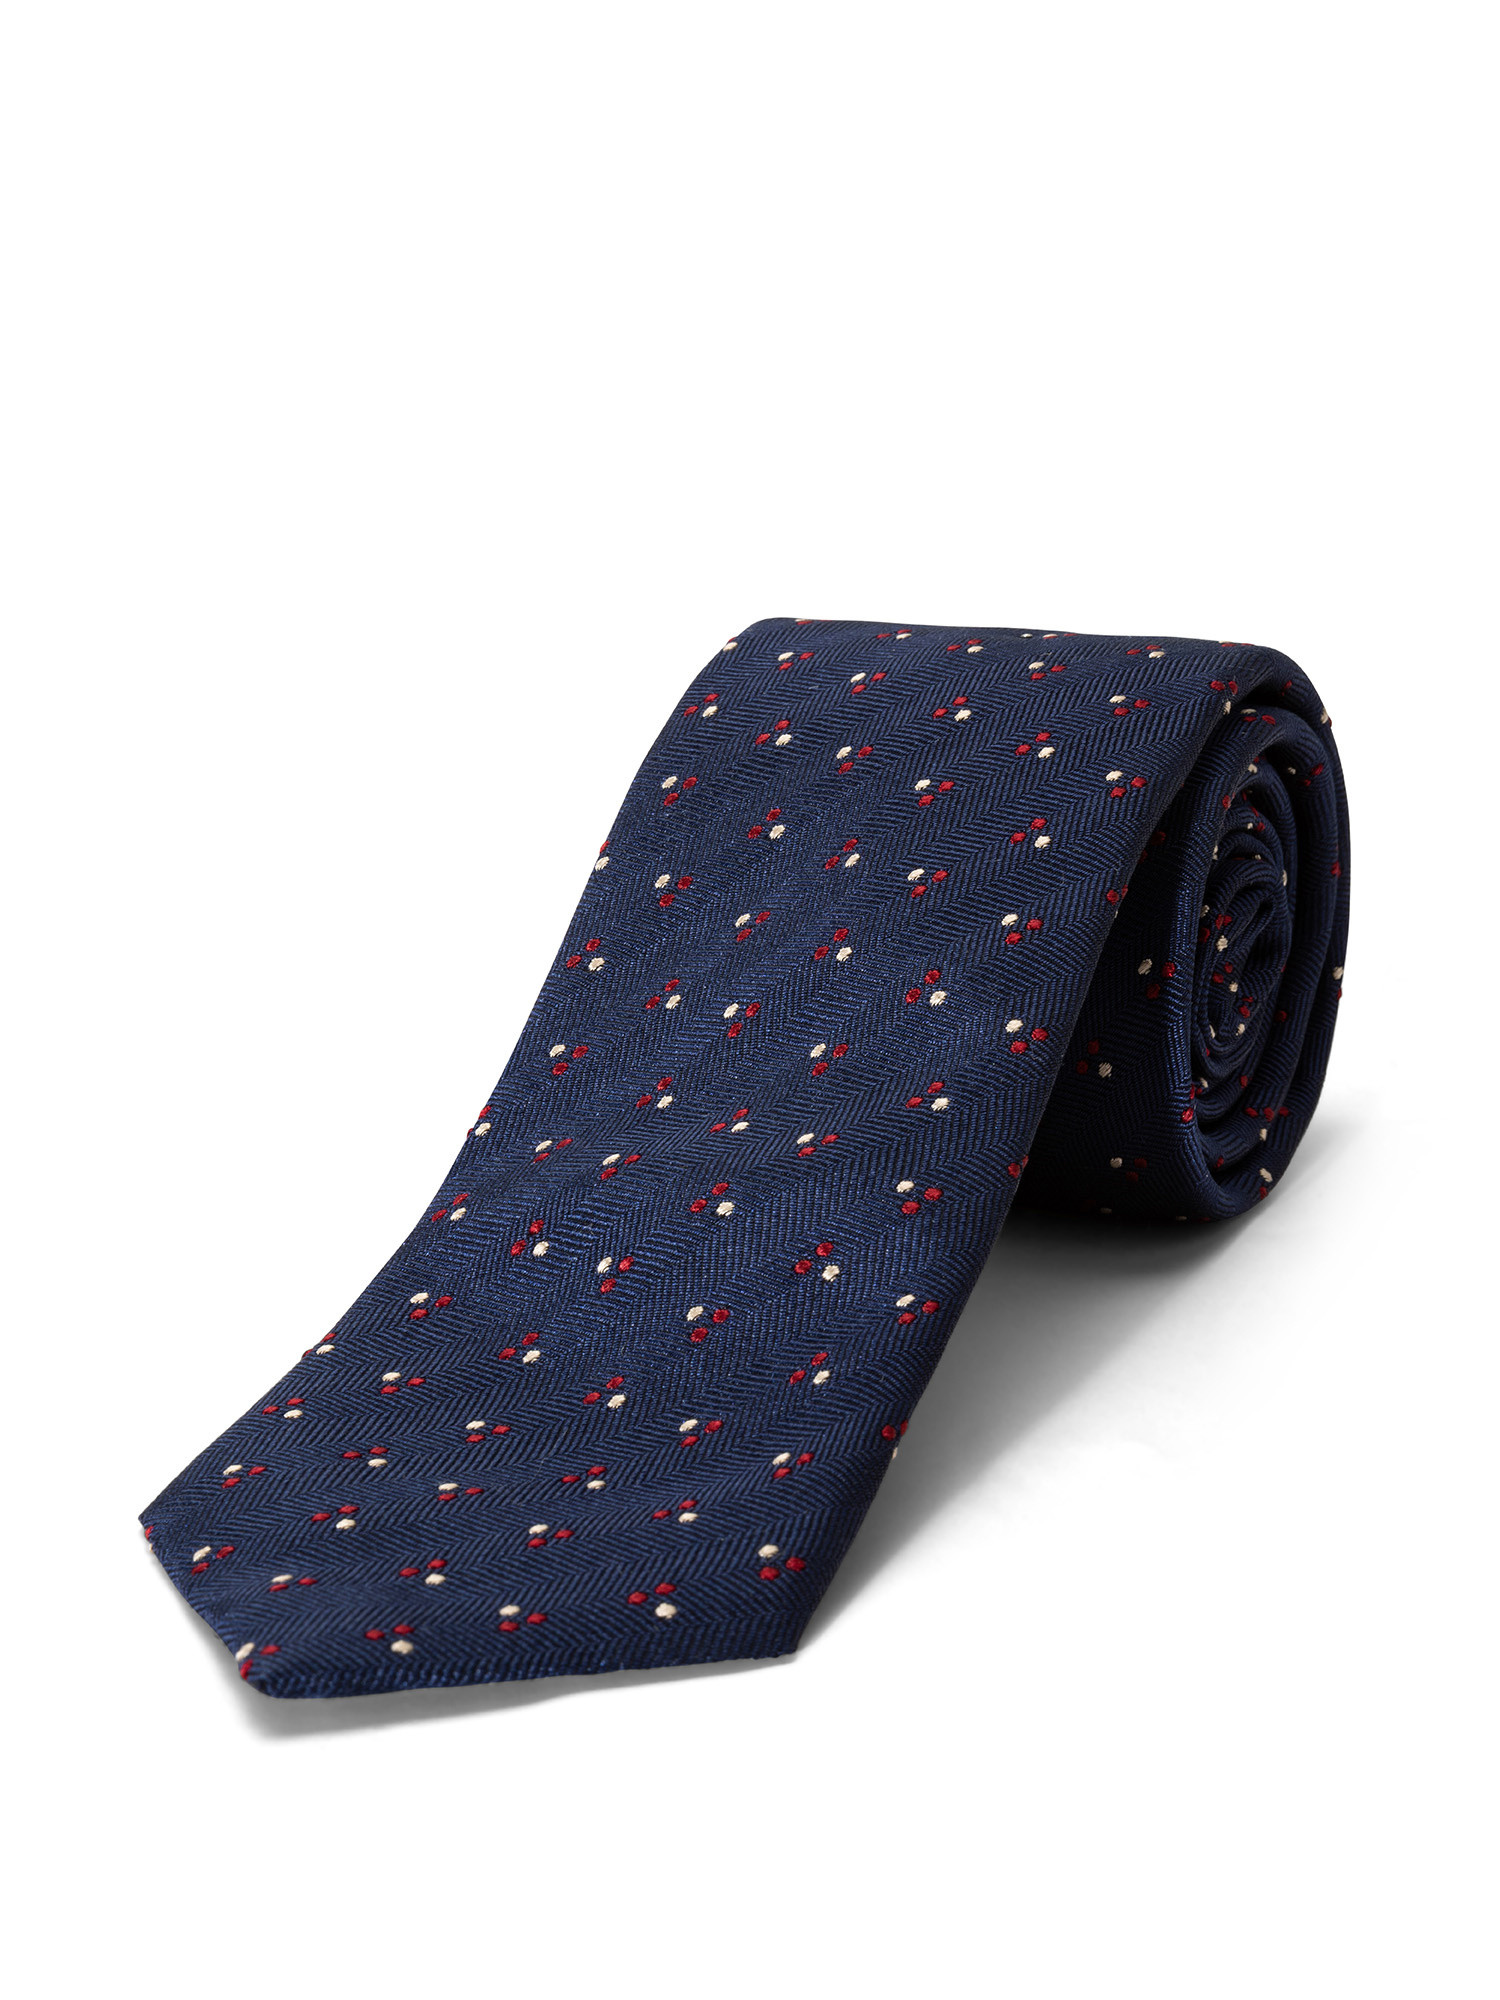 Luca D'Altieri - Patterned silk and cotton tie, Blue, large image number 0